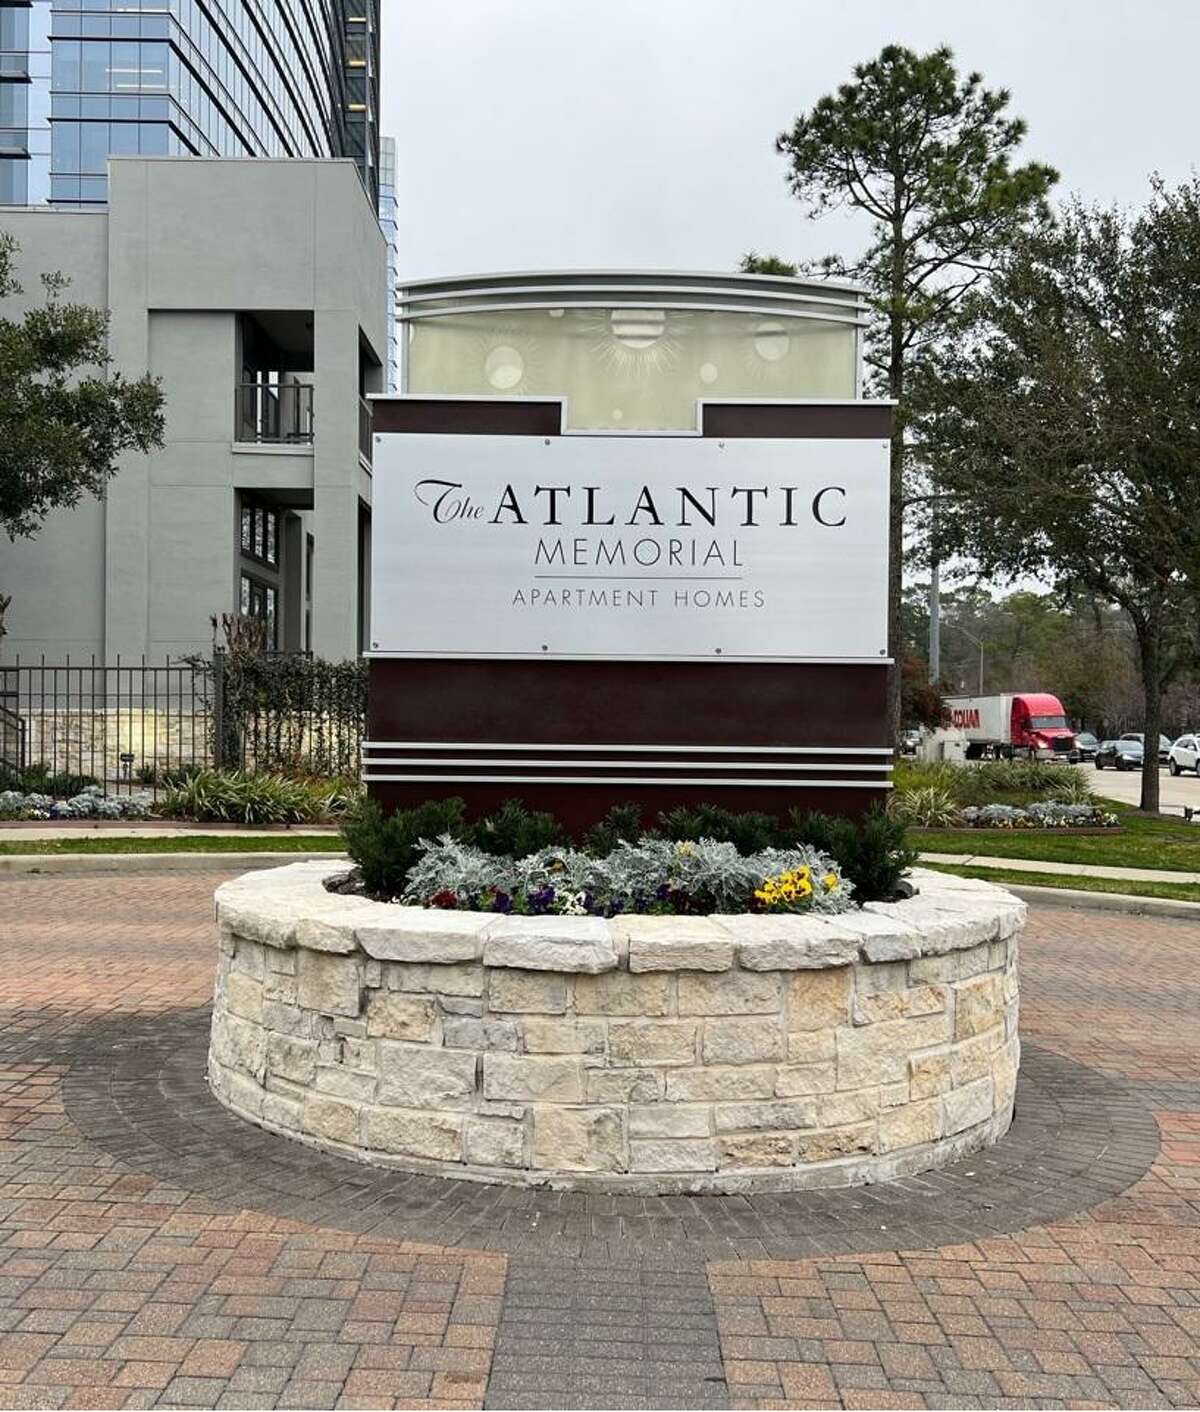 Atlantic Pacific Cos. acquired the 401-unit Broadstone Memorial apartments in the Energy Corridor. The new name of the complex is The Atlantic Memorial.